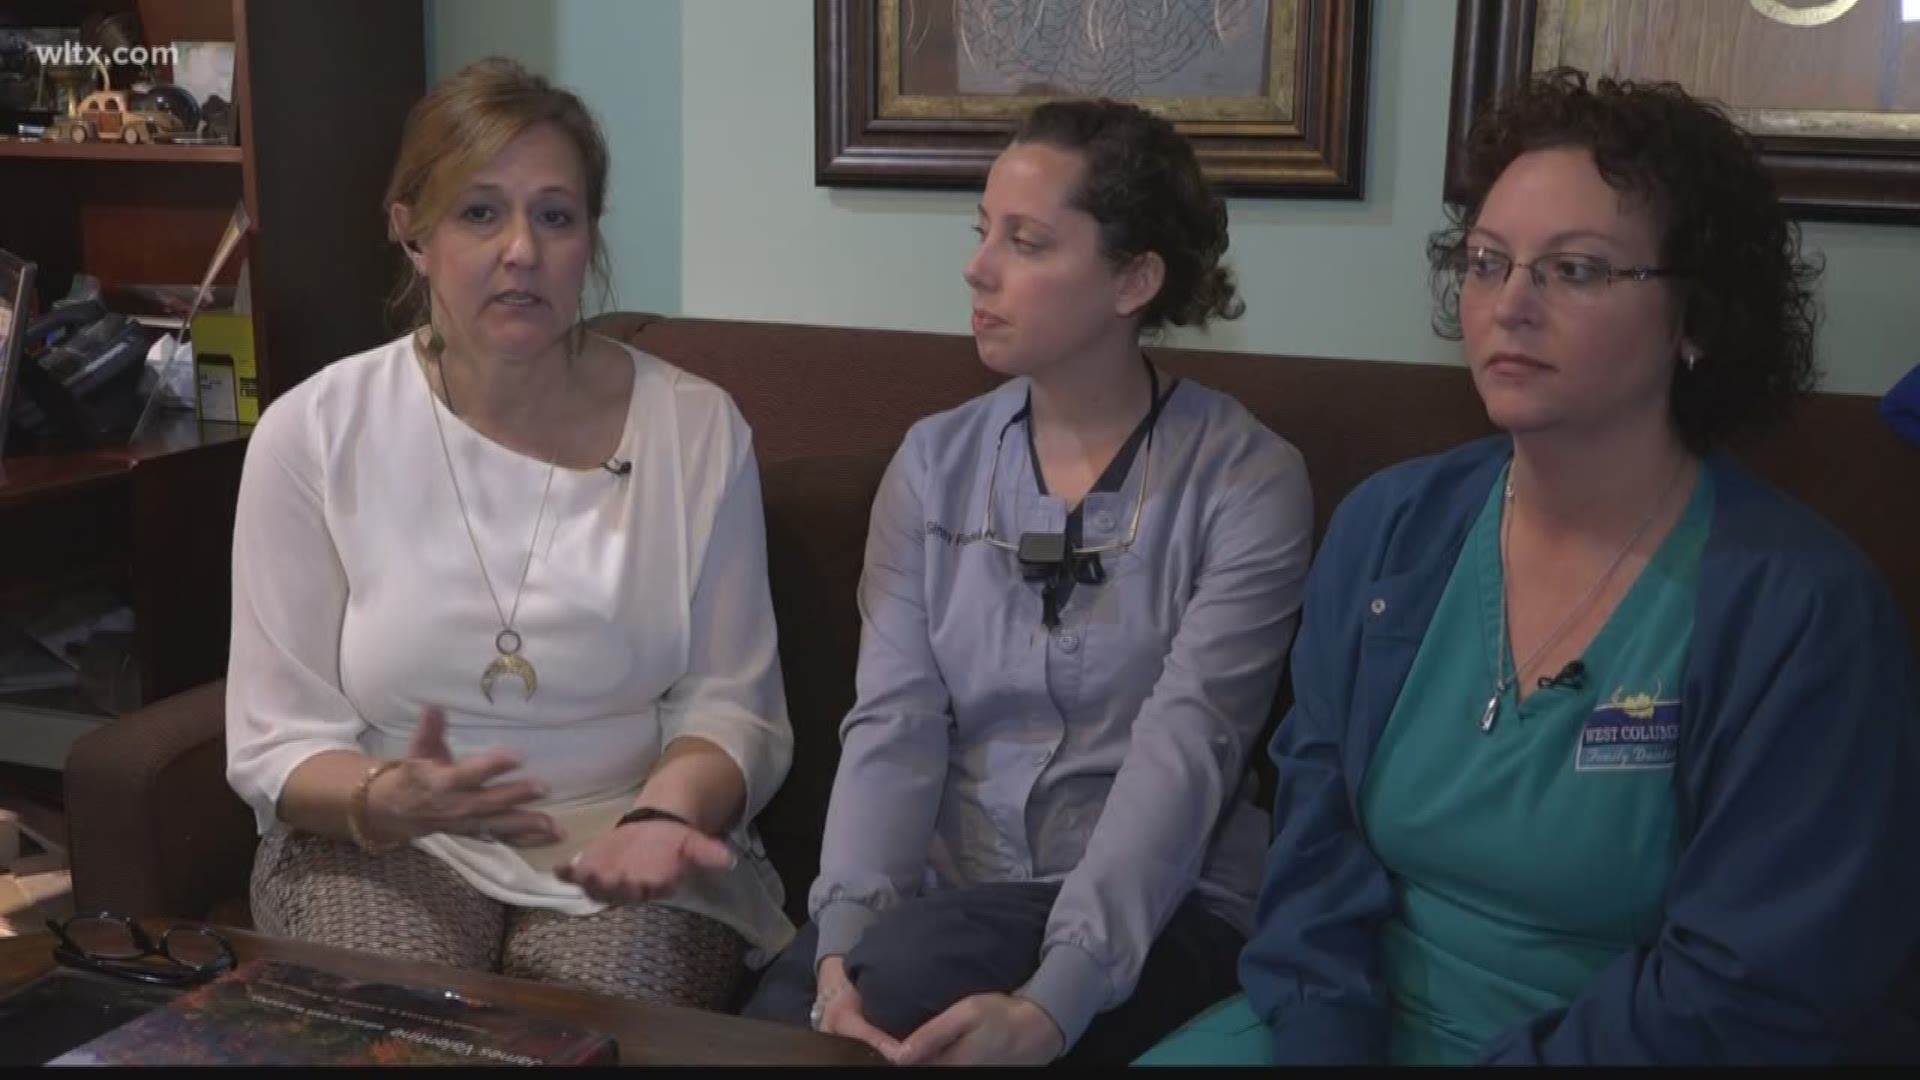 These women do not call themselves heroes, after reviving a victim overdosing on opioids.